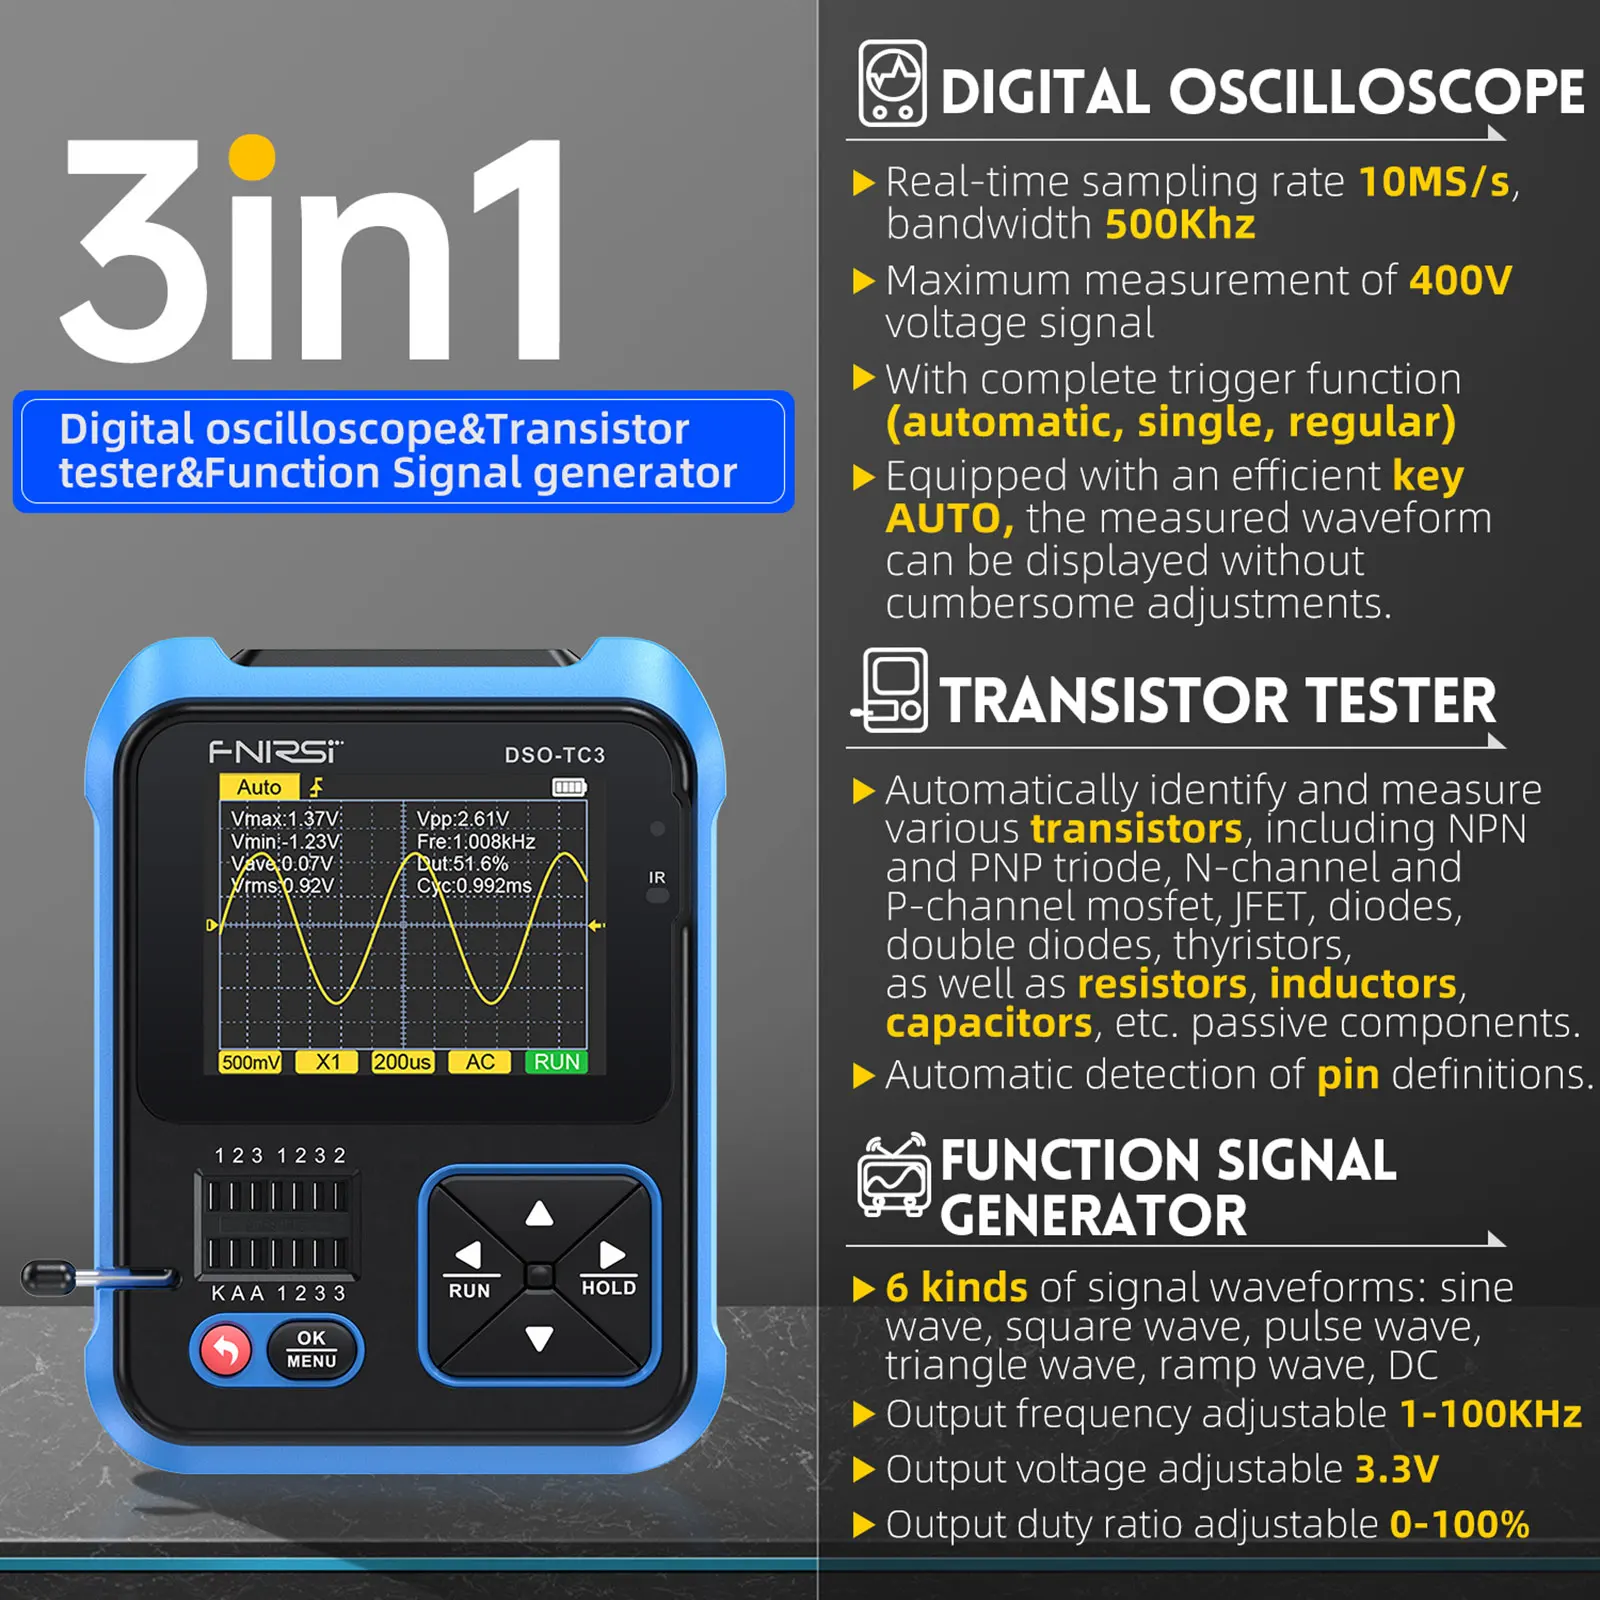 

FNIRSI DSO-TC3/DSO-TC2 Digital Oscilloscope Transistor Tester Signal Generator 3 in 1 Multifunction Electronic Component Tester